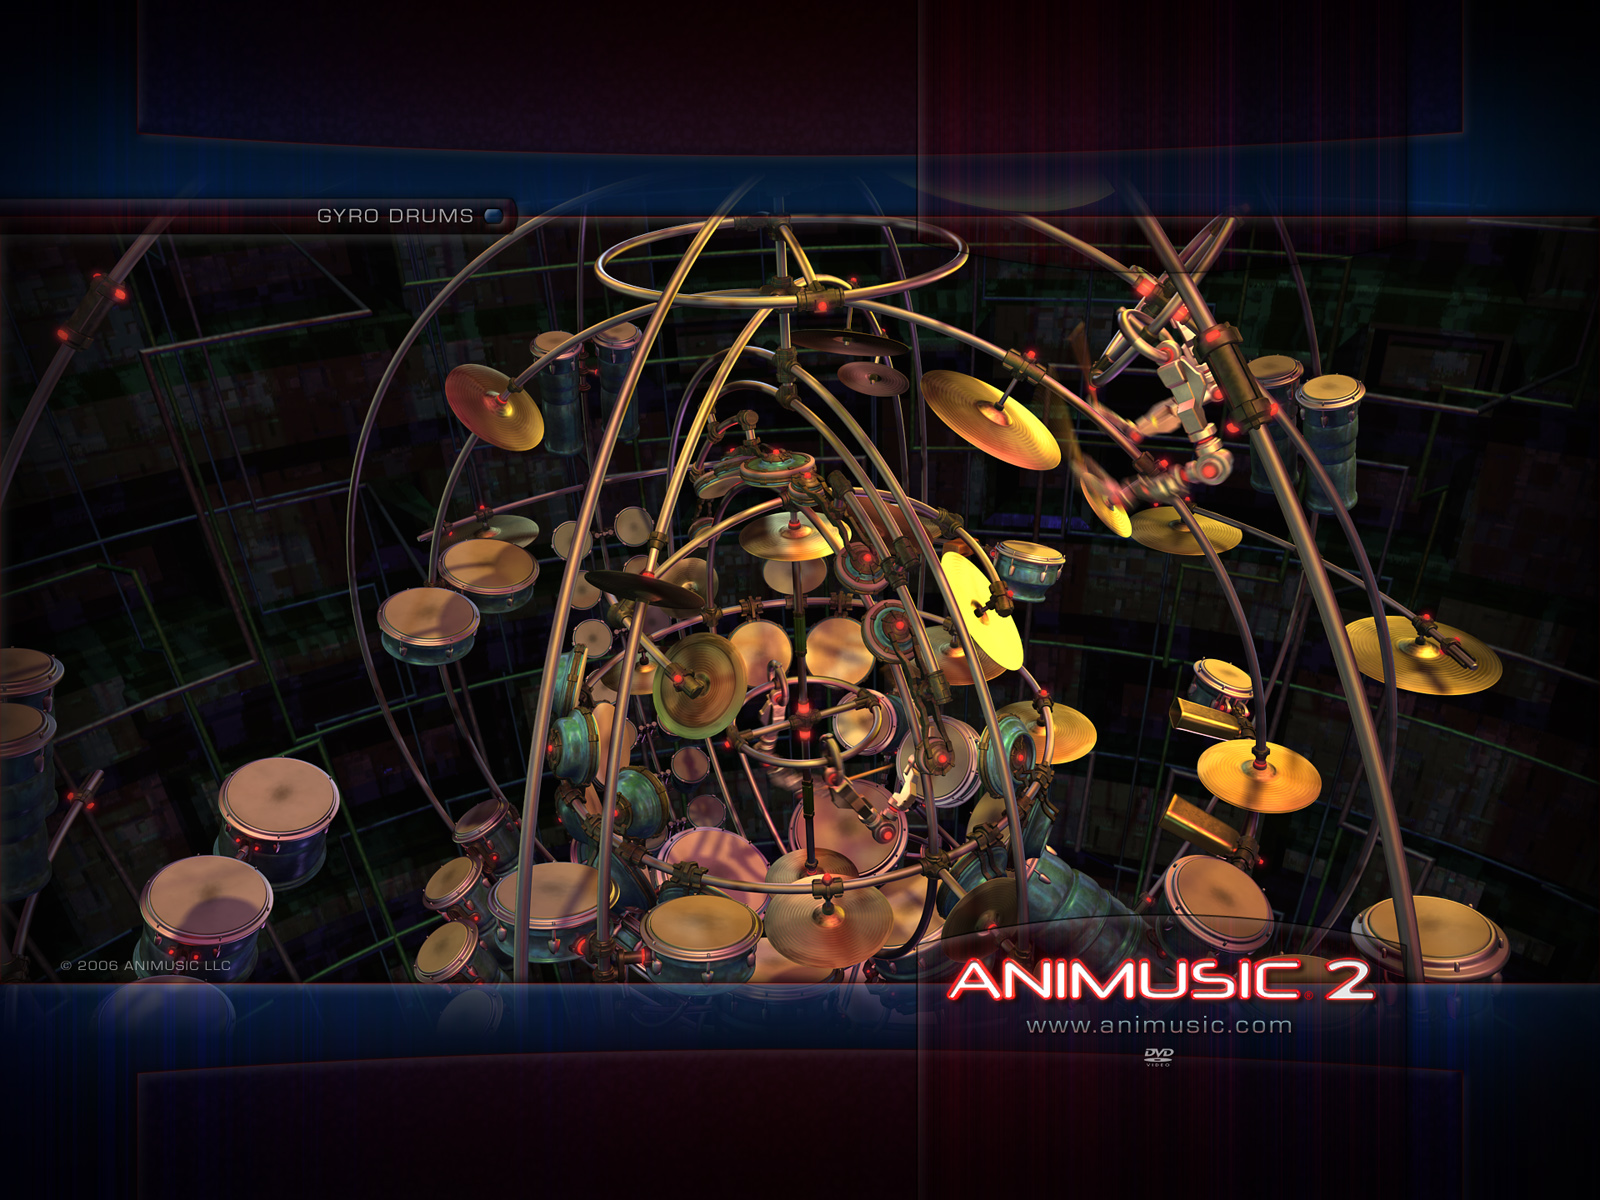 Abstract Virtual Musical Instruments Cg Animated In - Drums Wallpapers Hd - HD Wallpaper 